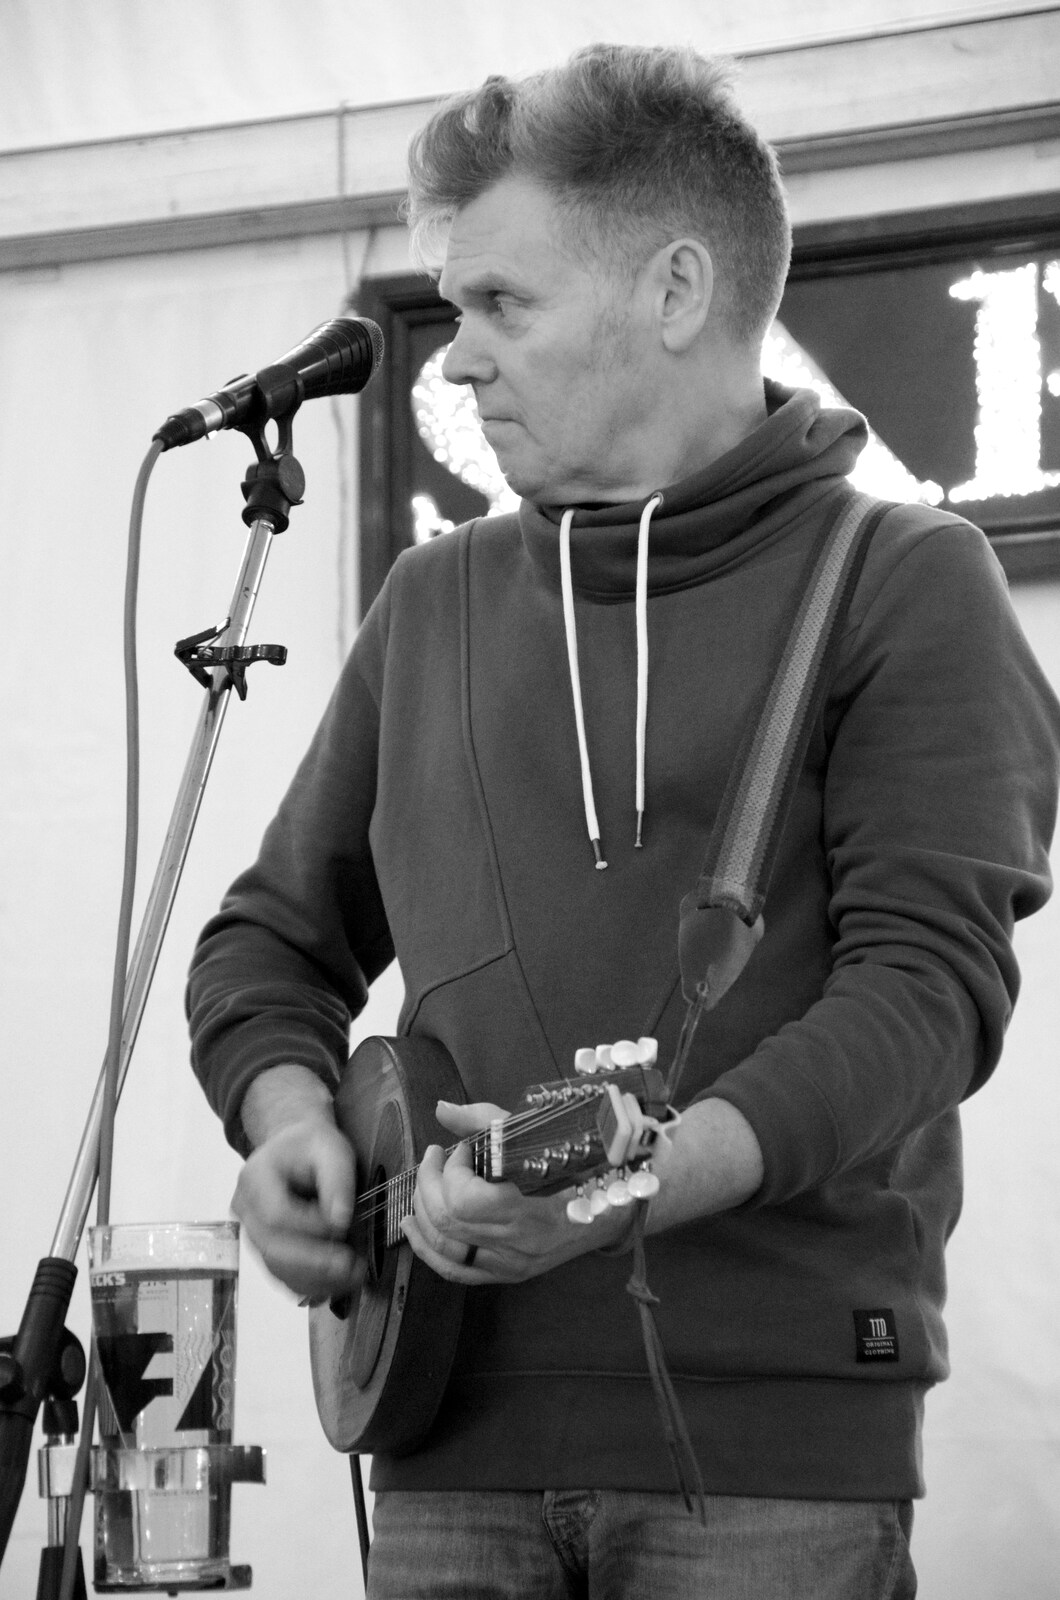 Ian Harvey, of The Harvs, on Mandolin from The Star Wing Winter Beer Fest, Redgrave, Suffolk - 31st January 2020